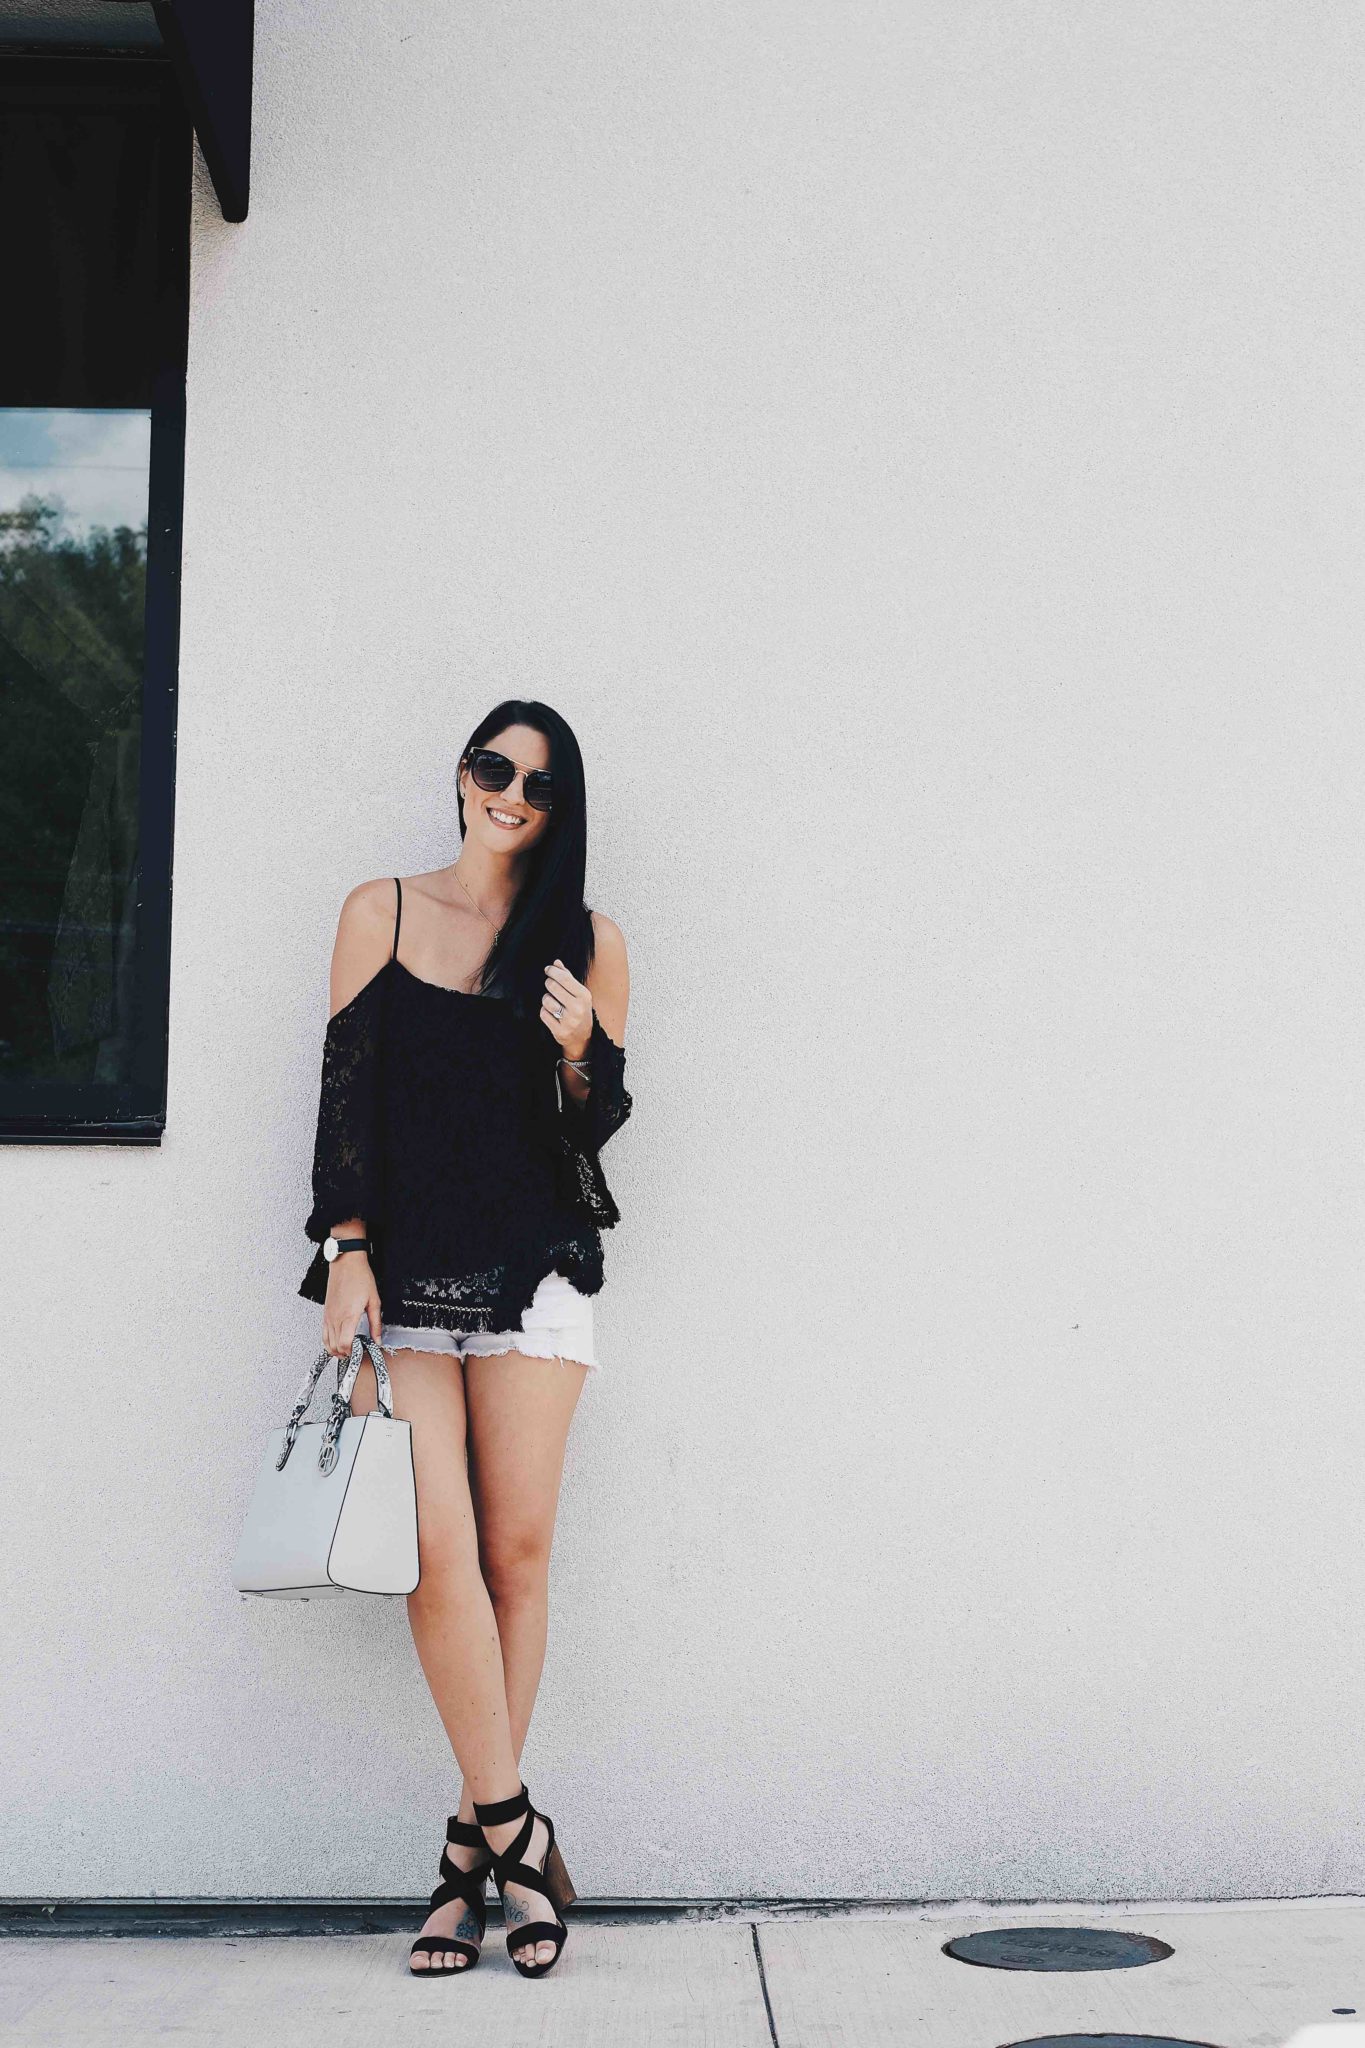 DTKAustin shares a beautiful black Bailey44 lace cold shoulder top, paired with white cutoff shorts, a Henri Bendel bag and Splendid black heels. Click for more information and photos. | how to style a cold shoulder top | how to wear a cold shoulder top | cold shoulder top style tips | summer fashion tips | summer outfit ideas | summer style tips | what to wear for summer | warm weather fashion | fashion for summer | style tips for summer | outfit ideas for summer || Dressed to Kill